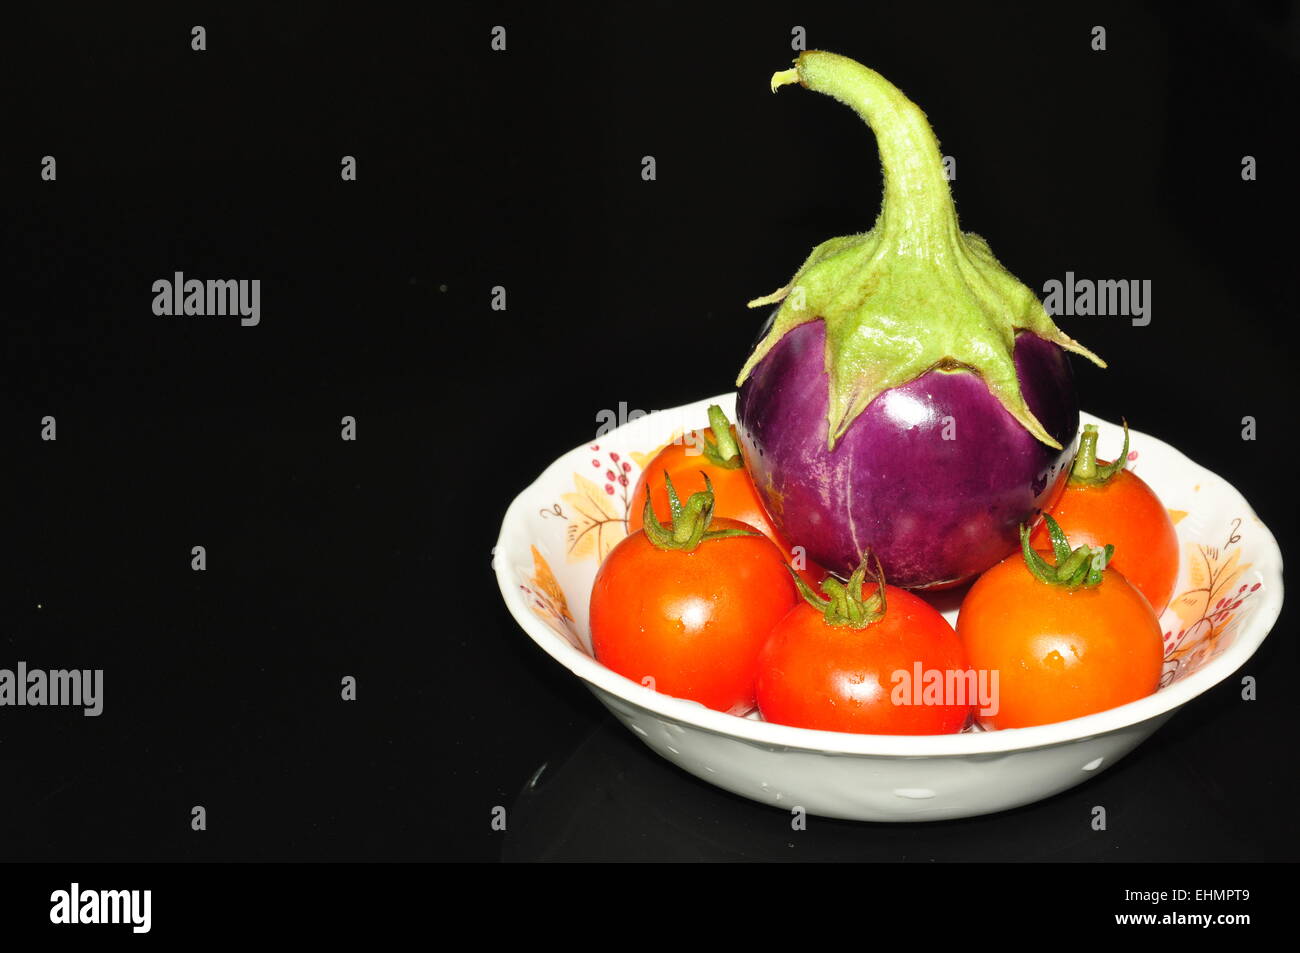 purple egg plant and red tomatoes Stock Photo